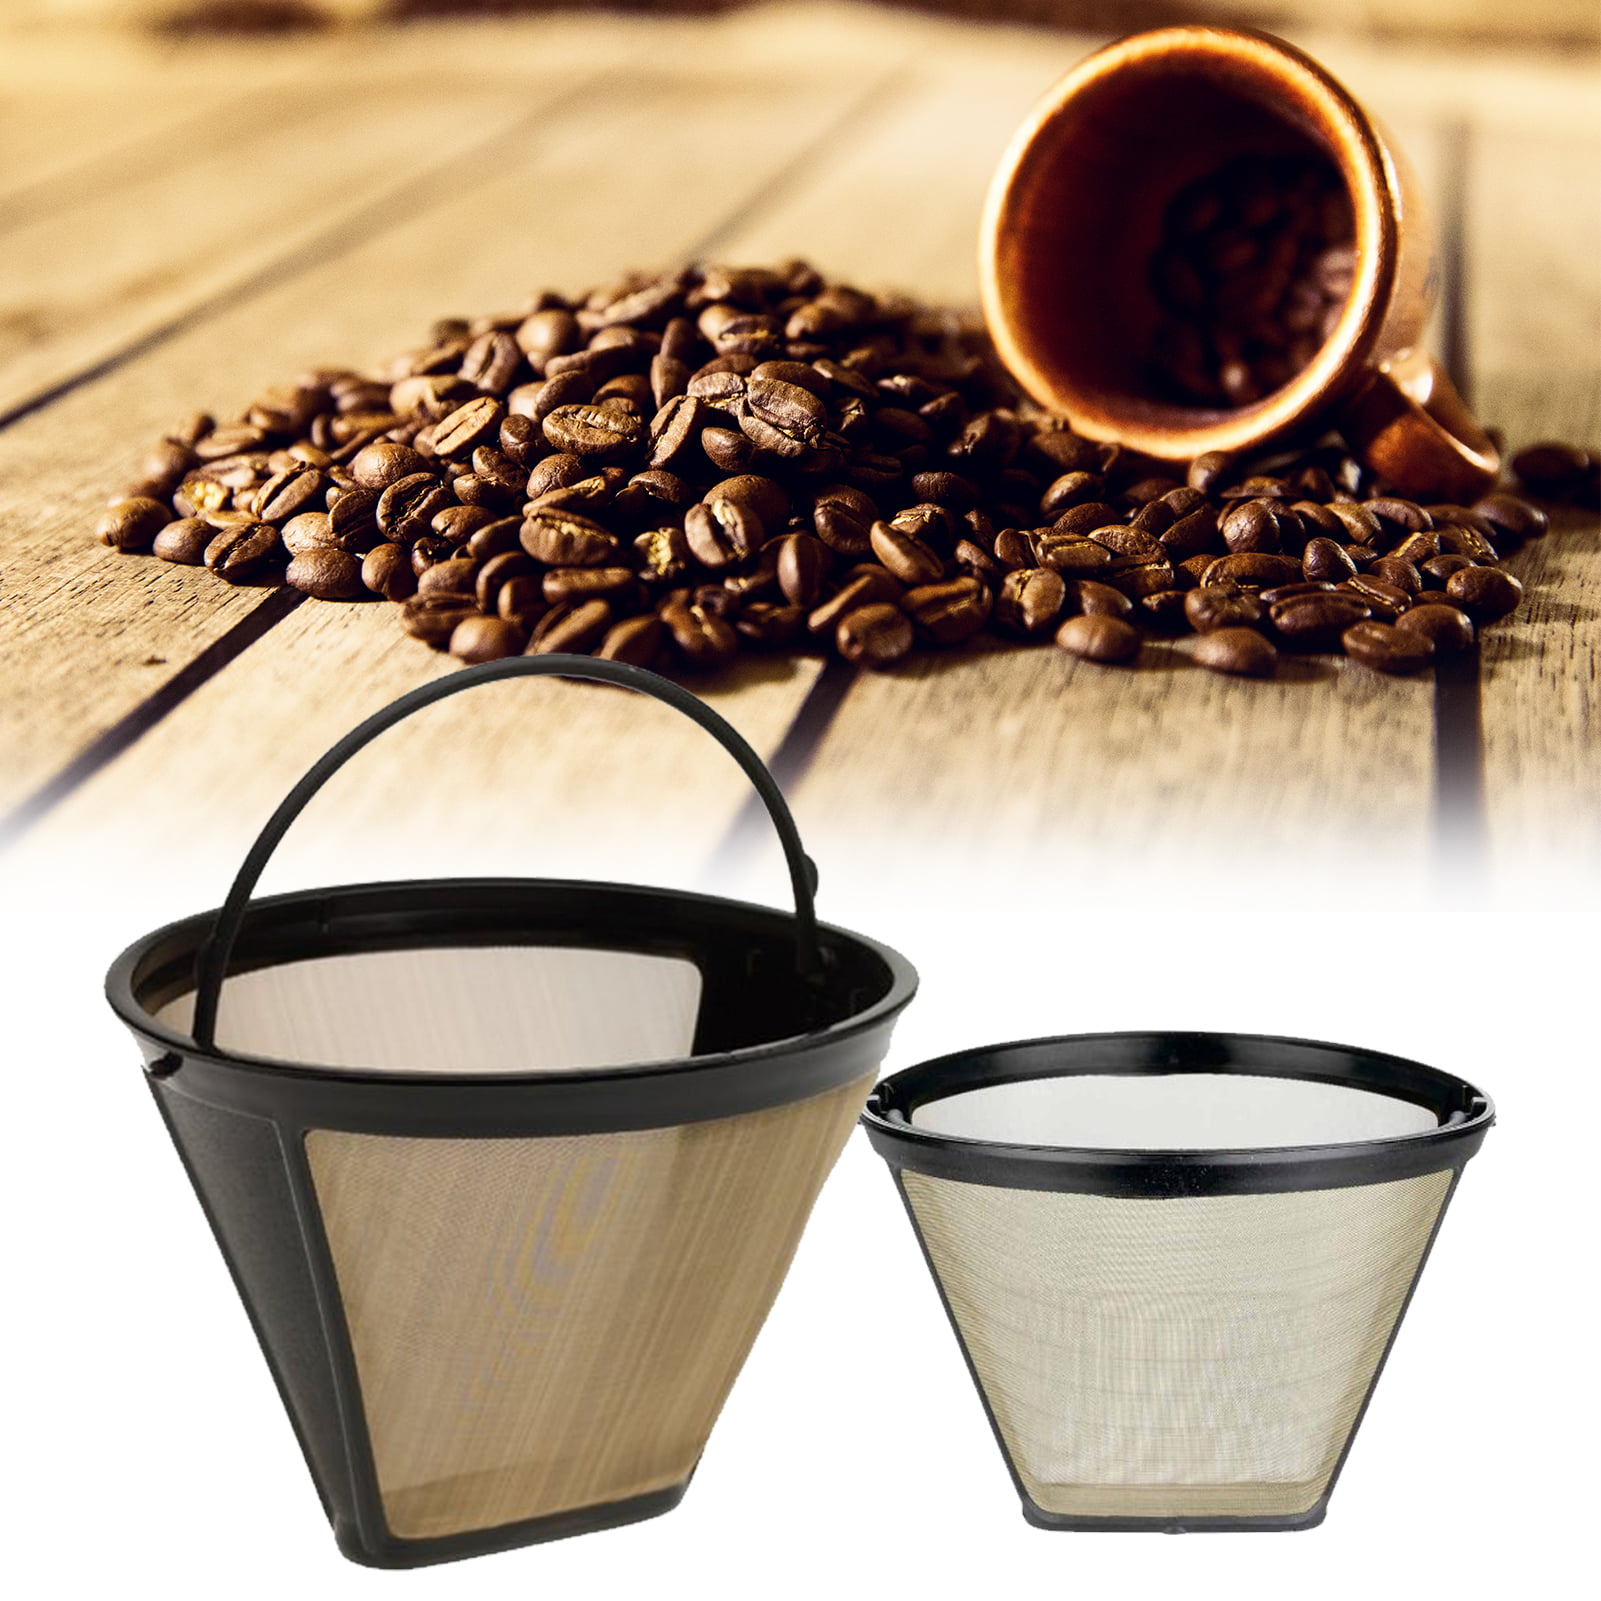 New_Reusable Stainless Steel Mesh Basket Filter Coffee Strainer W/Handle Durable 